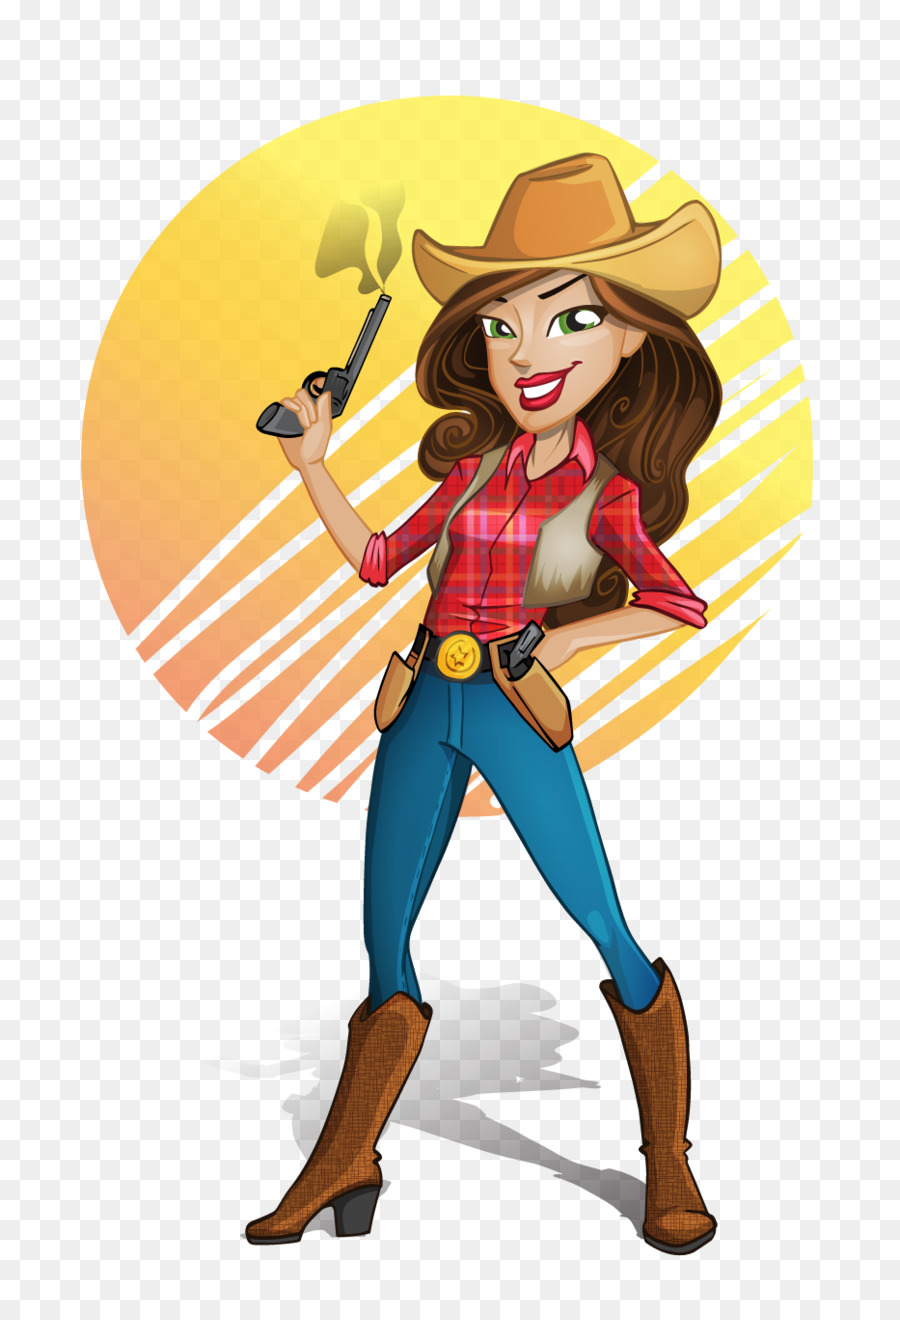 Jessie Cowboy Woman on top Cartoon - cowgirl png download - 933*1363 - Free Transparent Jessie png Download.